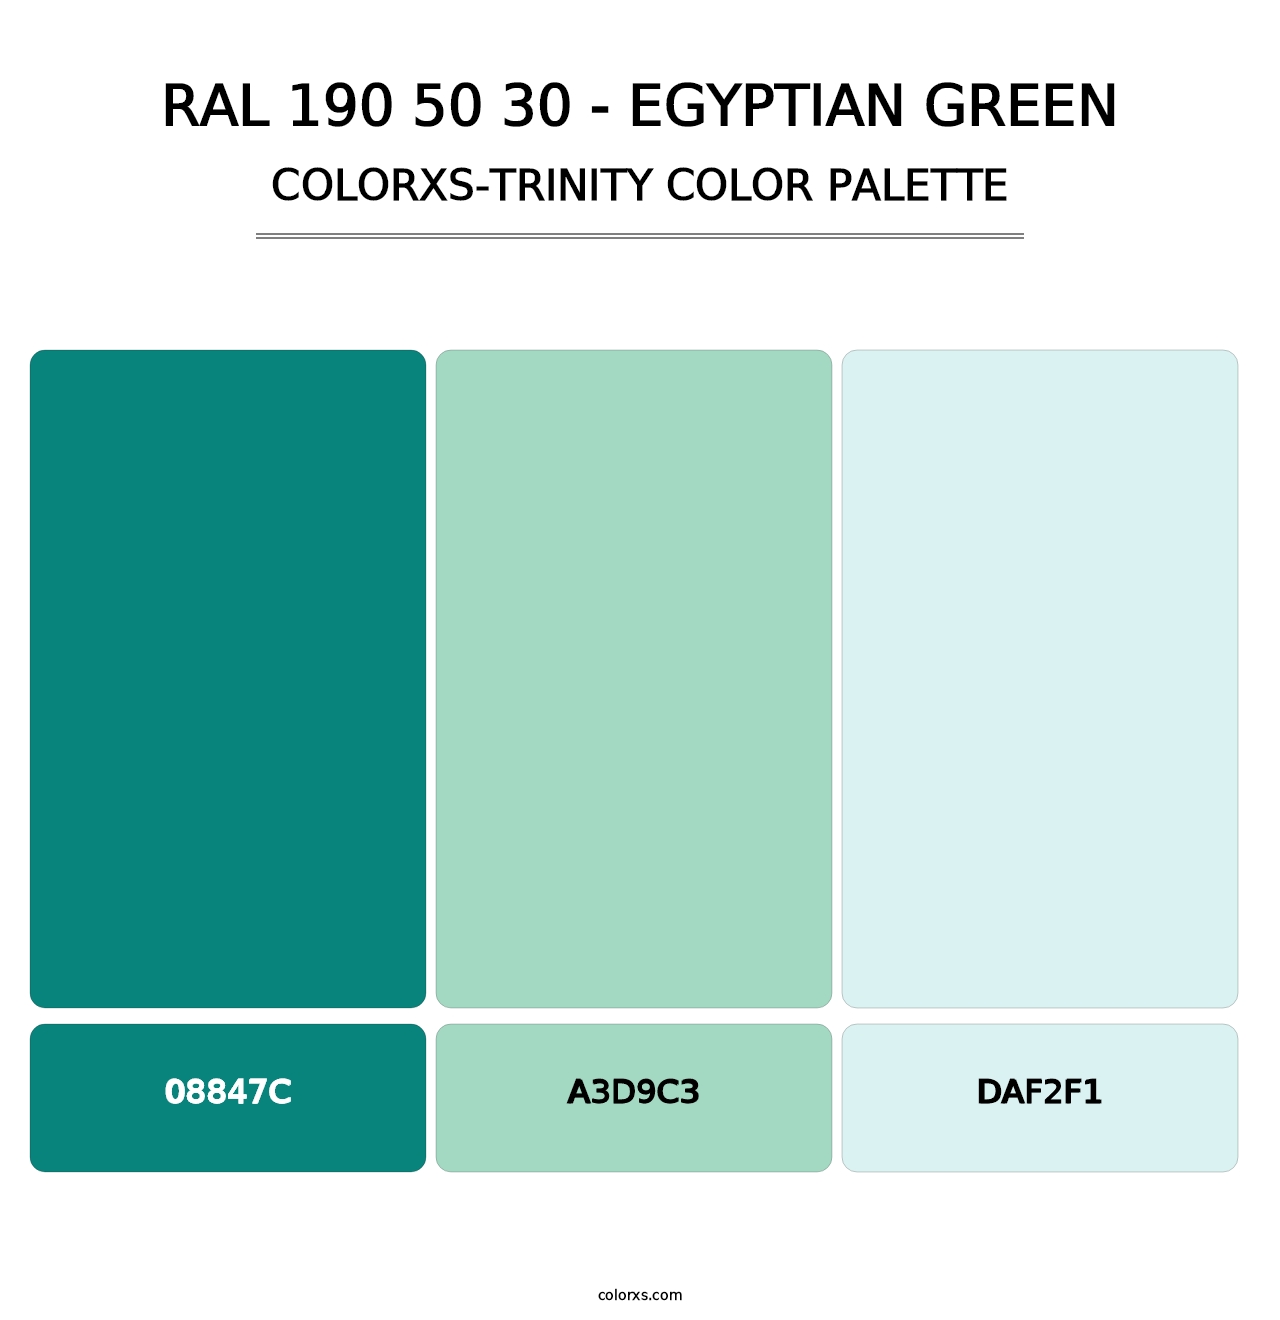 RAL 190 50 30 - Egyptian Green - Colorxs Trinity Palette